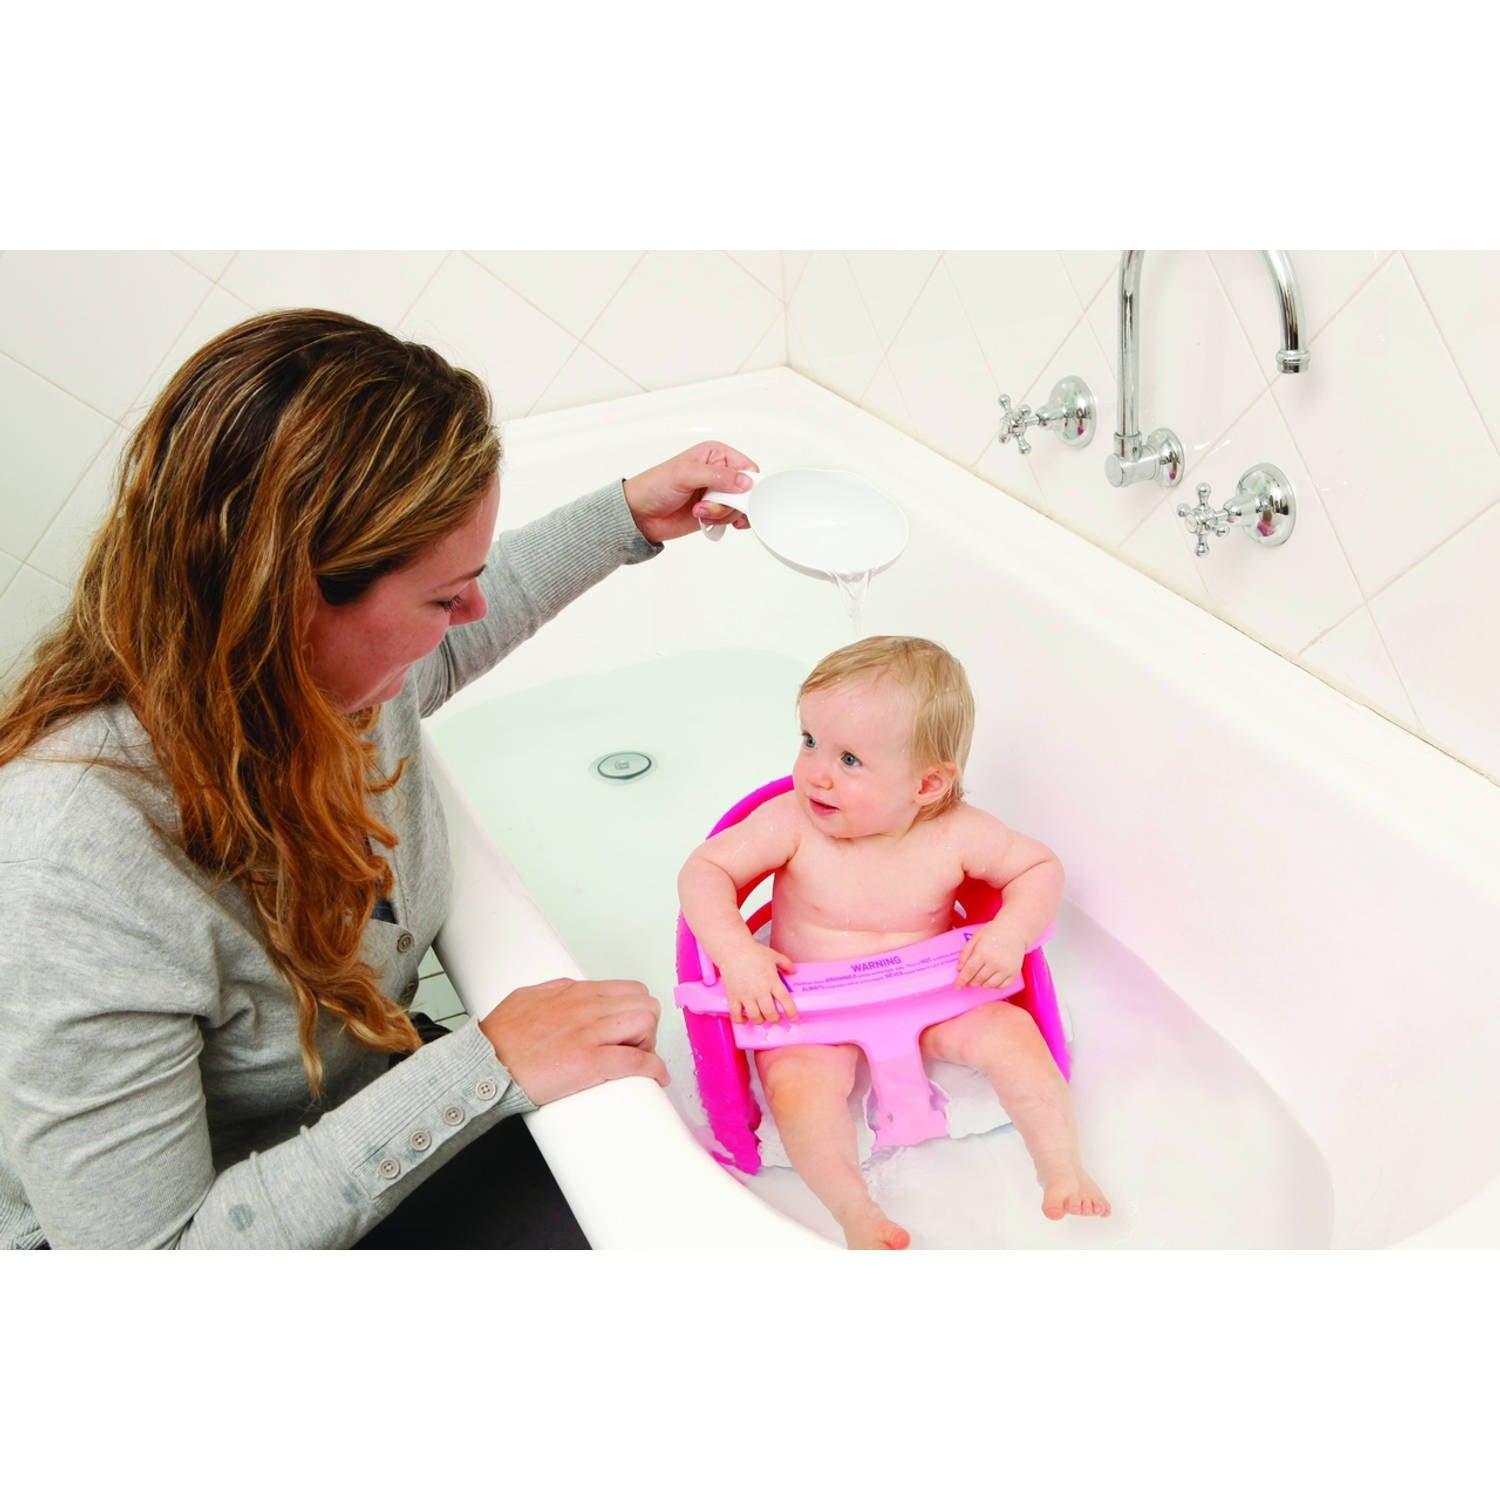 Dreambaby Bath seat with Handy Scoop - Pink - BumbleToys - 0-24 Months, 2-4 Years, Babies, Baby Saftey & Health, Cecil, Girls, Nursery Toys, Potties, Potty, Pre-Order